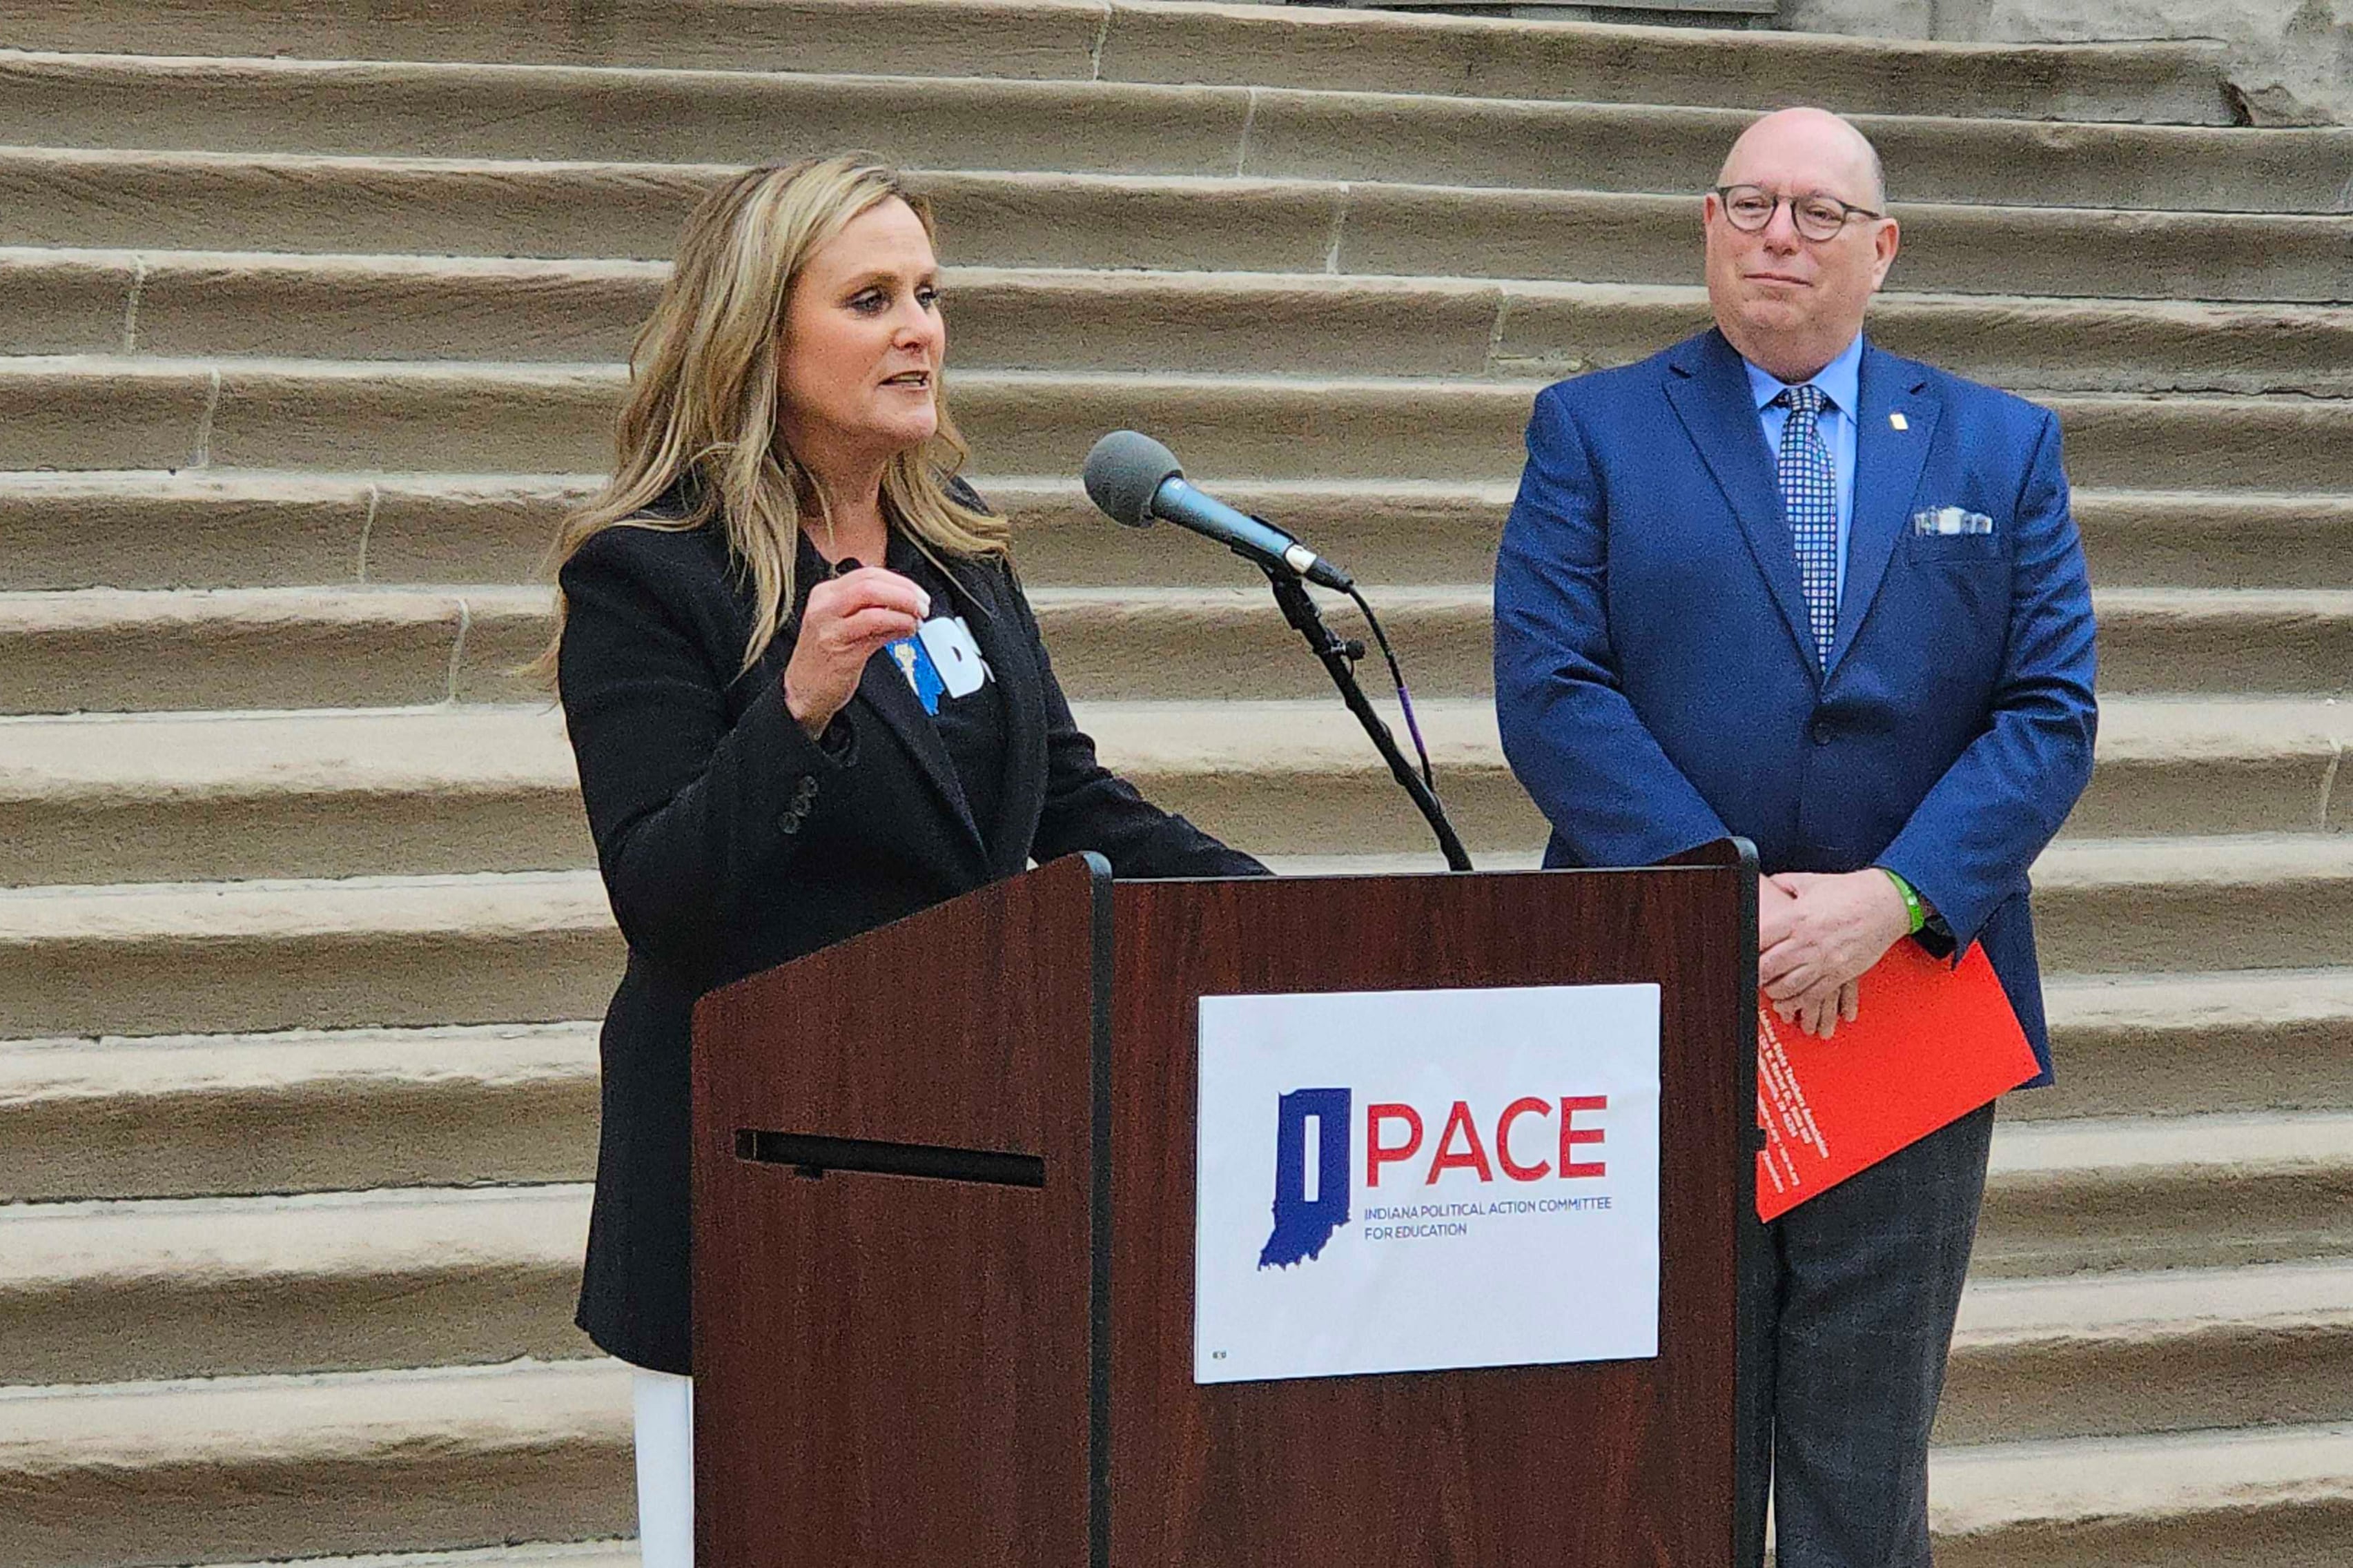 A woman with medium blond hair stands behind a wooden podium with a person wearing a blue suit and a set of stone stairs in the background.